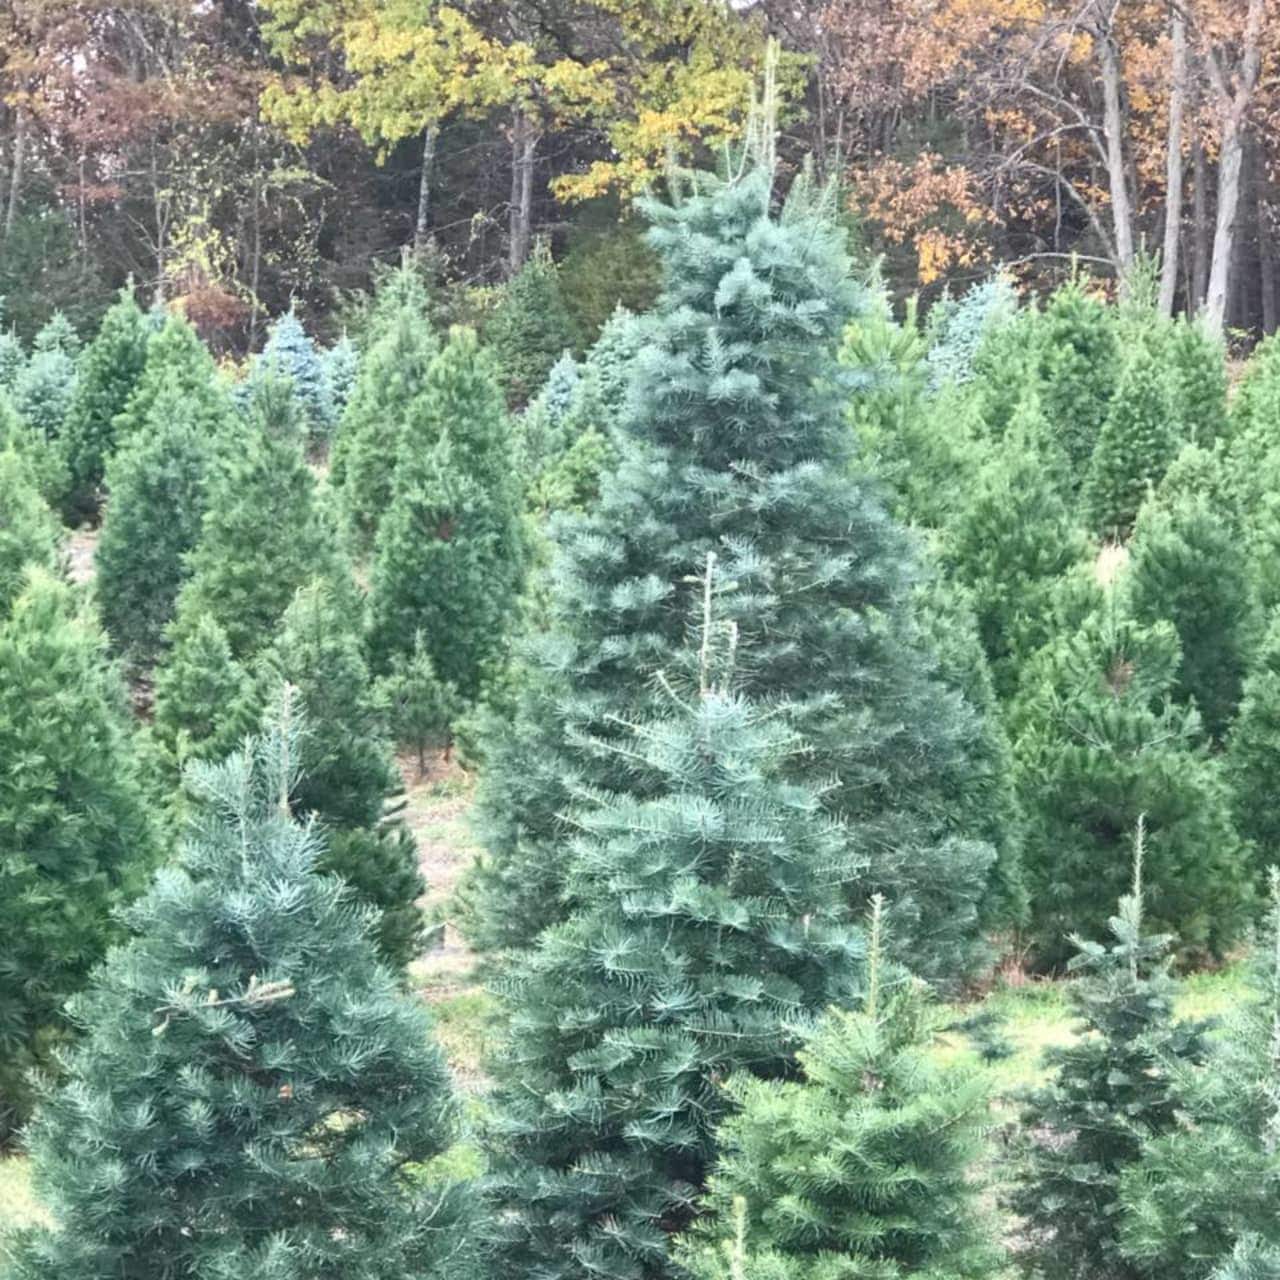 Live Christmas trees can contain high levels of mold.